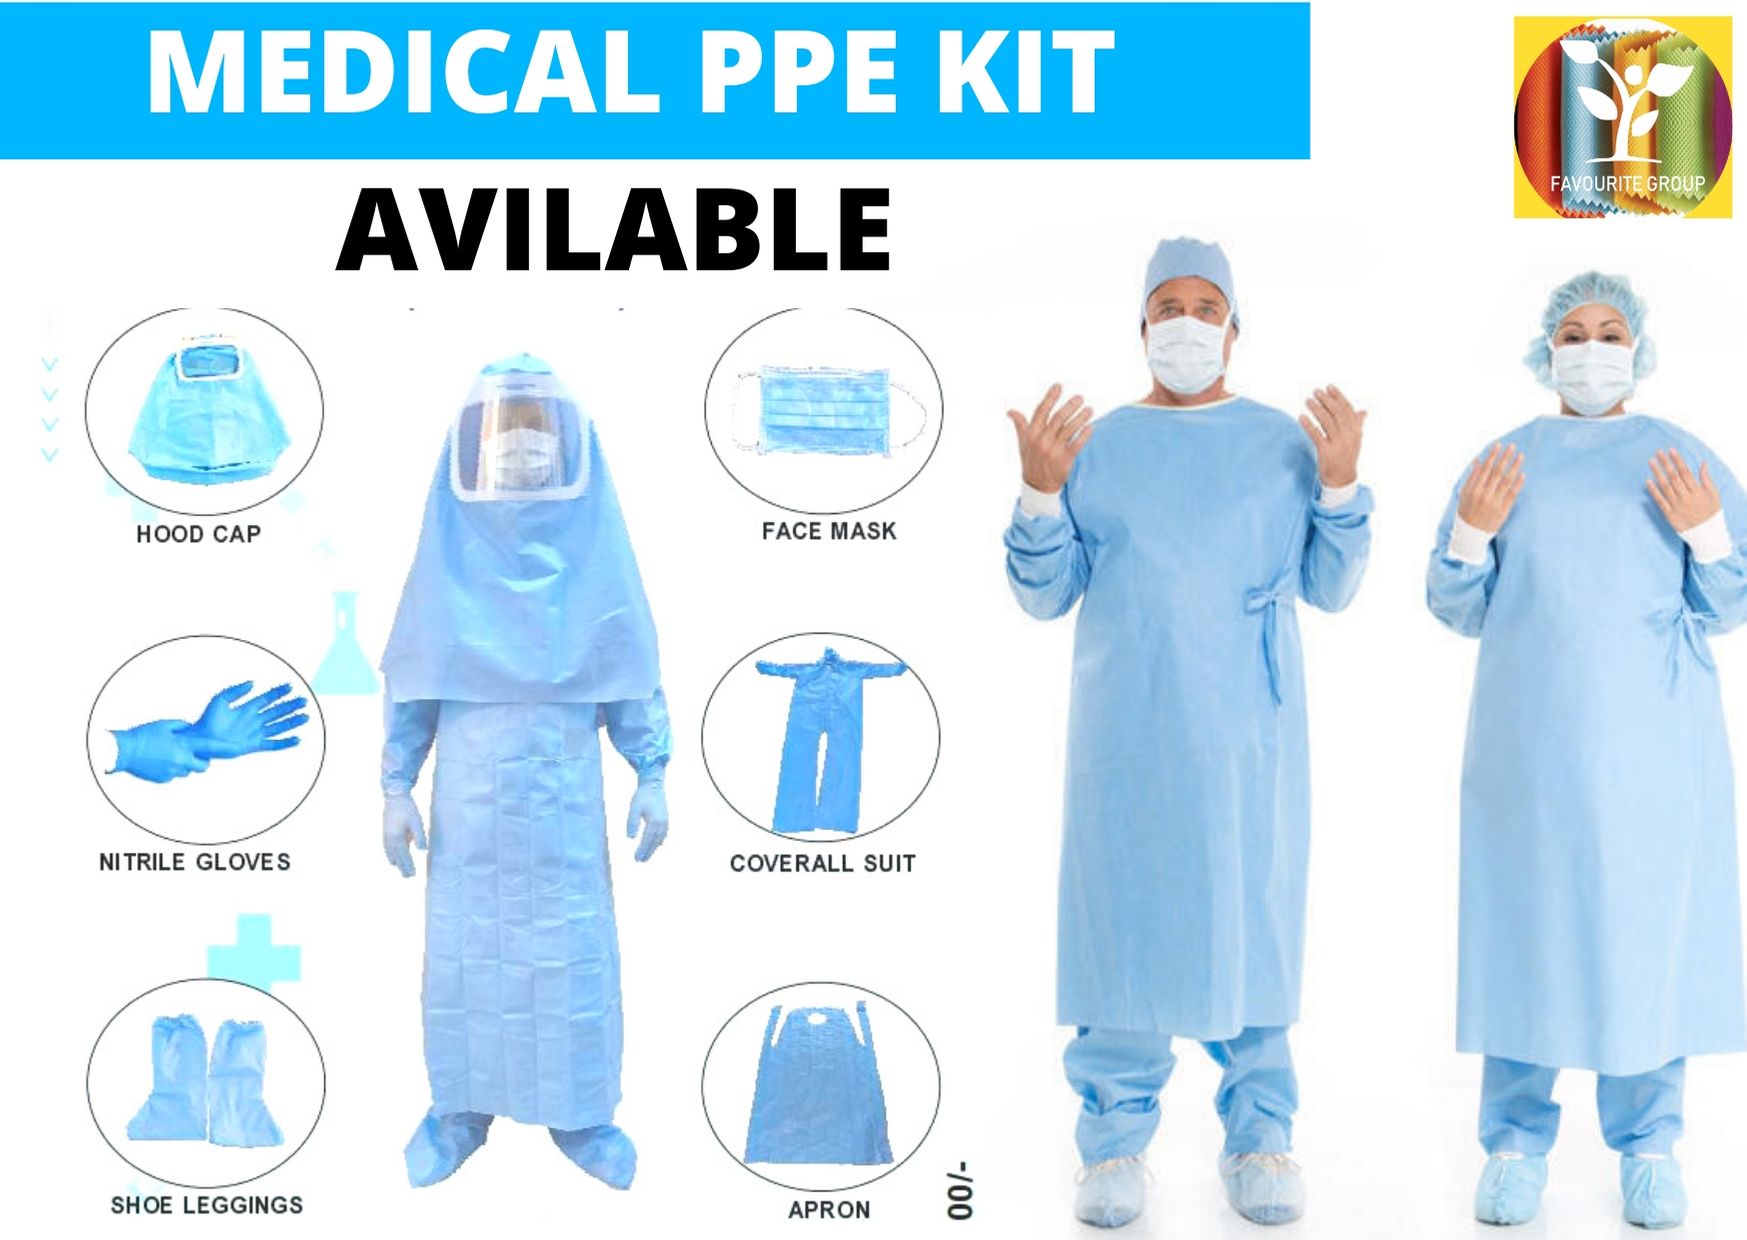 PPE KIT Personal Protective Equipment